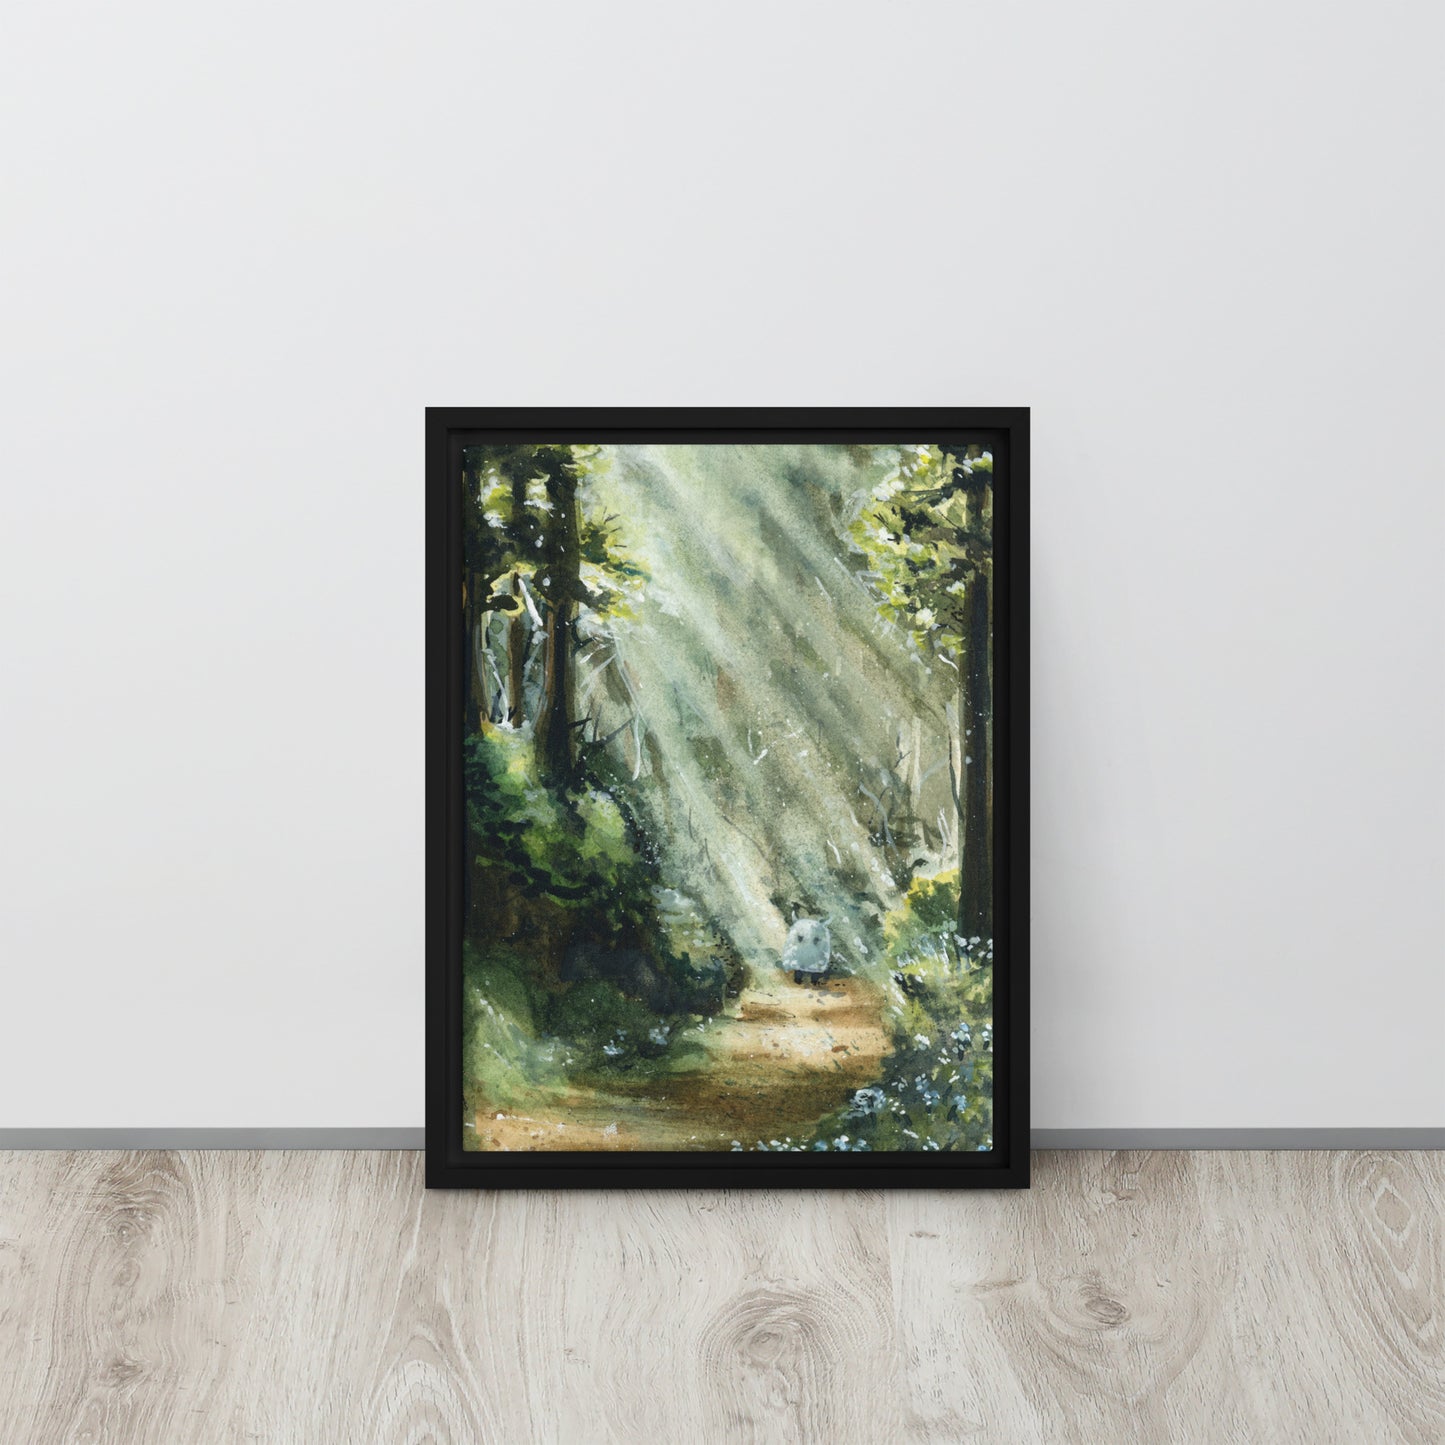 Forget-me-not Forest Sprite - Poster or Canvas Print, with or without Frame